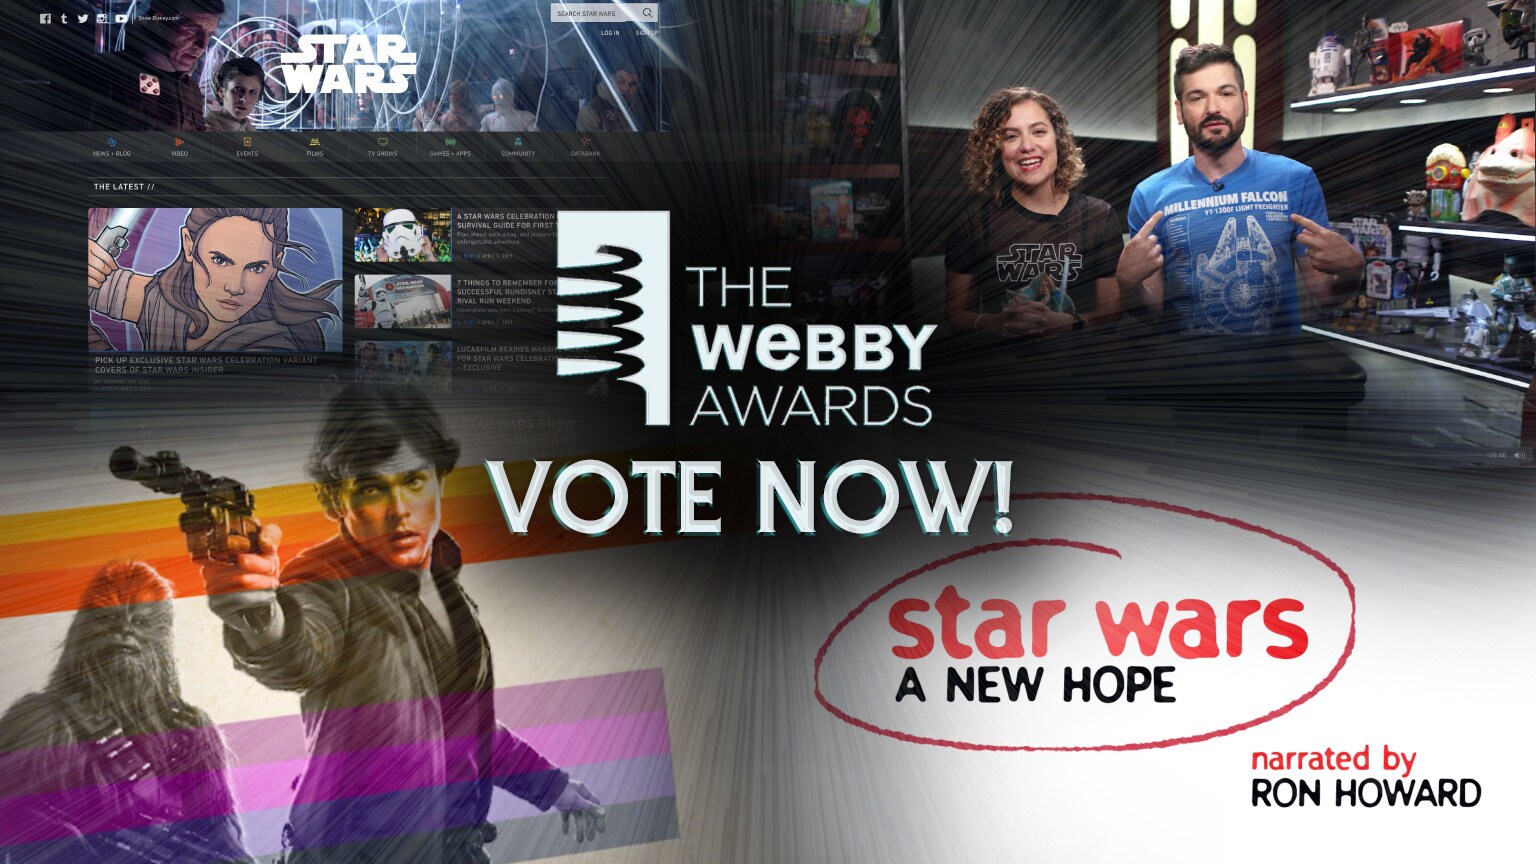 Vote for Star Wars in the 2019 Webby Awards!